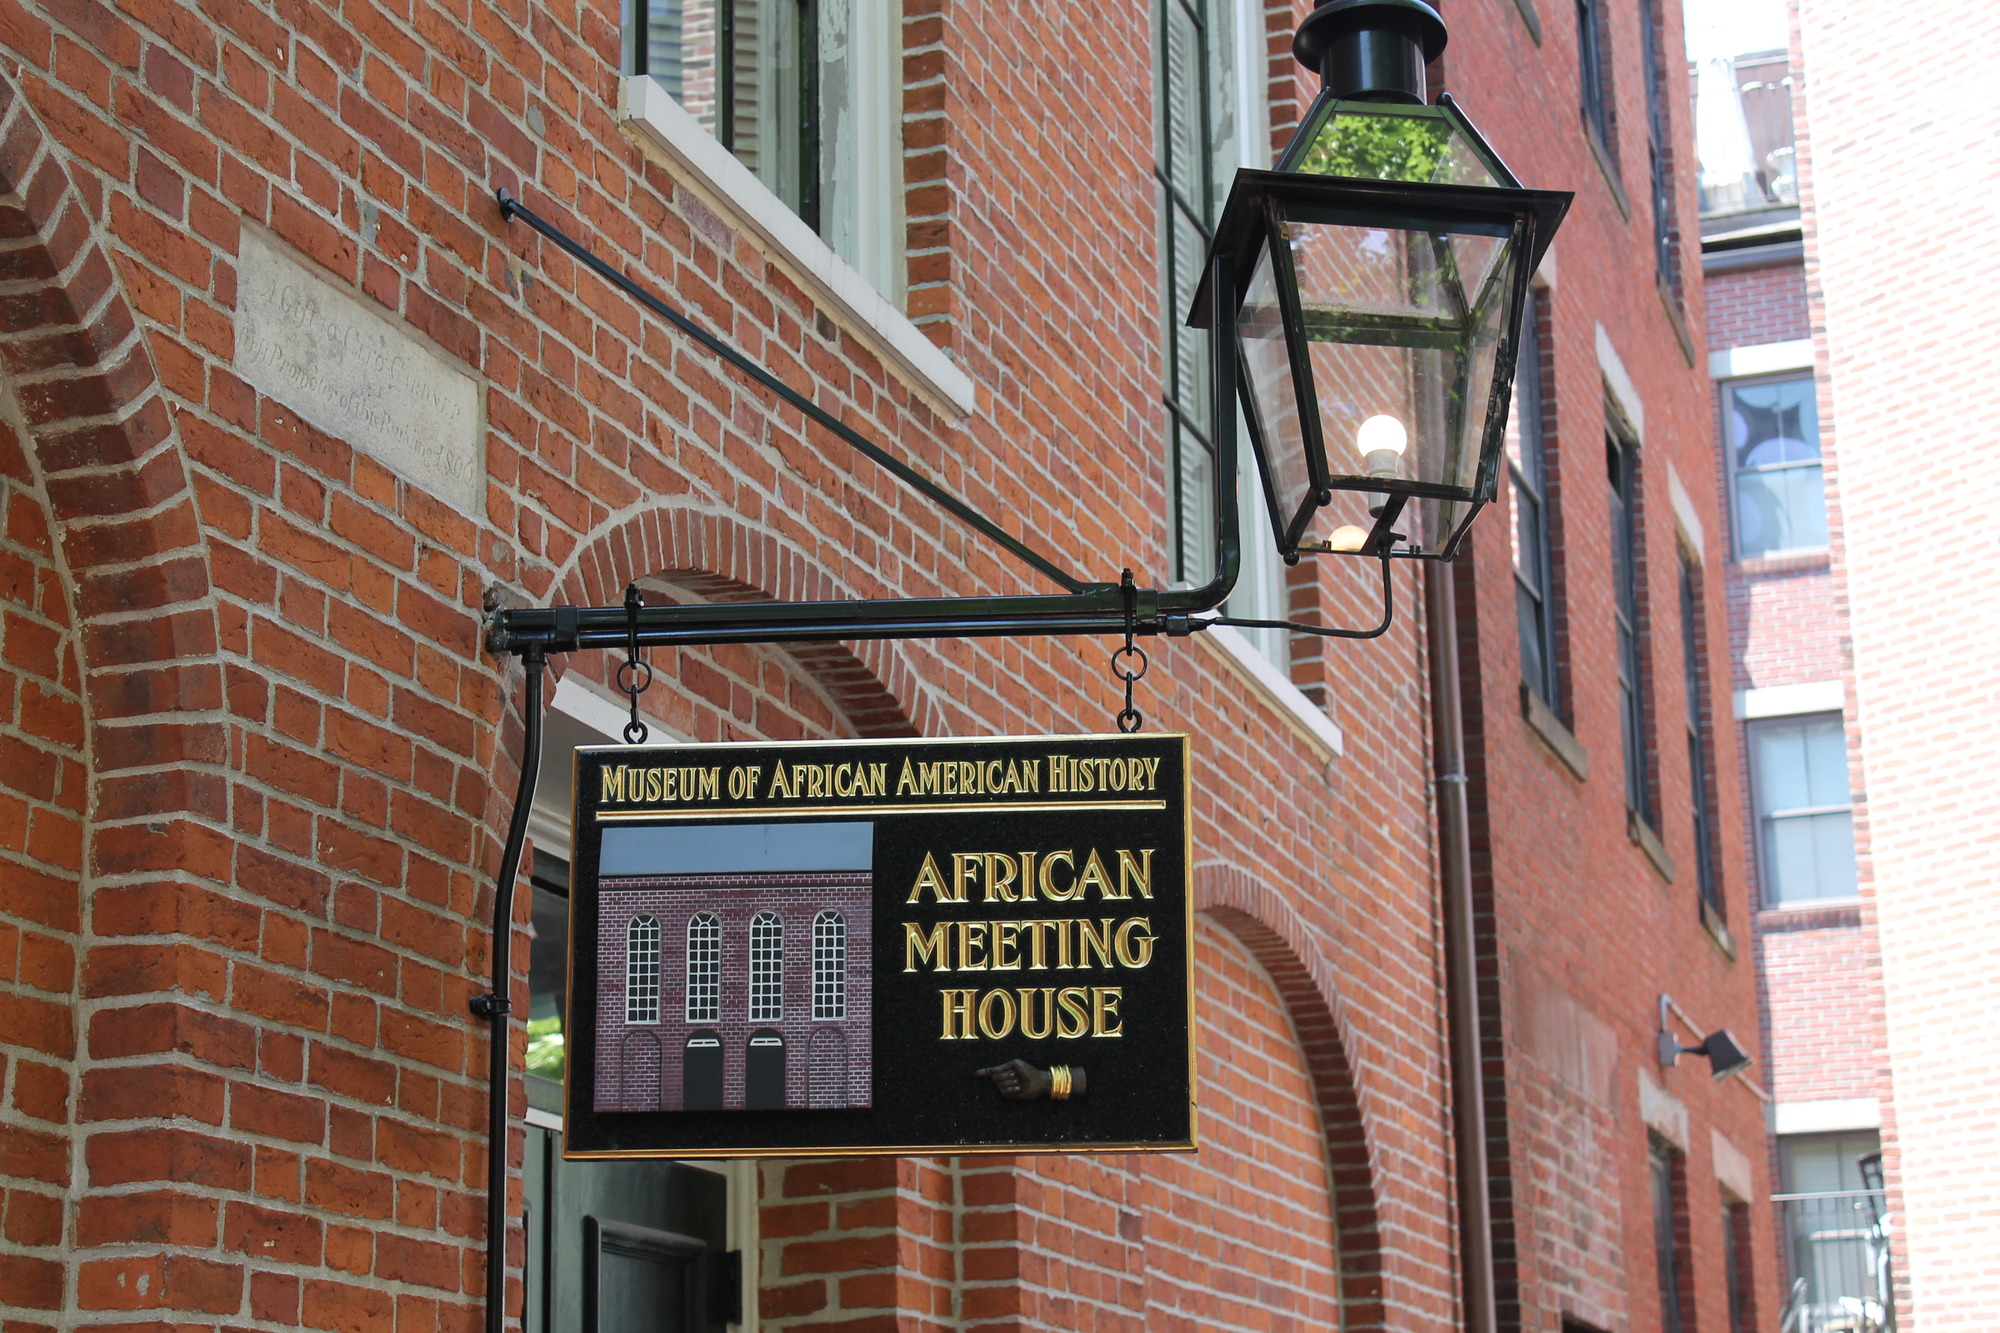 An outdoor image take from the street. The African Meeting House is made of dark red bricks and is only partially shown. A sign post is in the center of the image as it extends out parallel to the street below. The sign hanging from it is rectangular, made of wood, and painted black. It shows an image of the building with the words Museum of African American History above and African Meeting House beside it. There is also a hand pointing to the left underneath those words. The hand is of an African American. An old fashion light is at the very end of the sign pole.